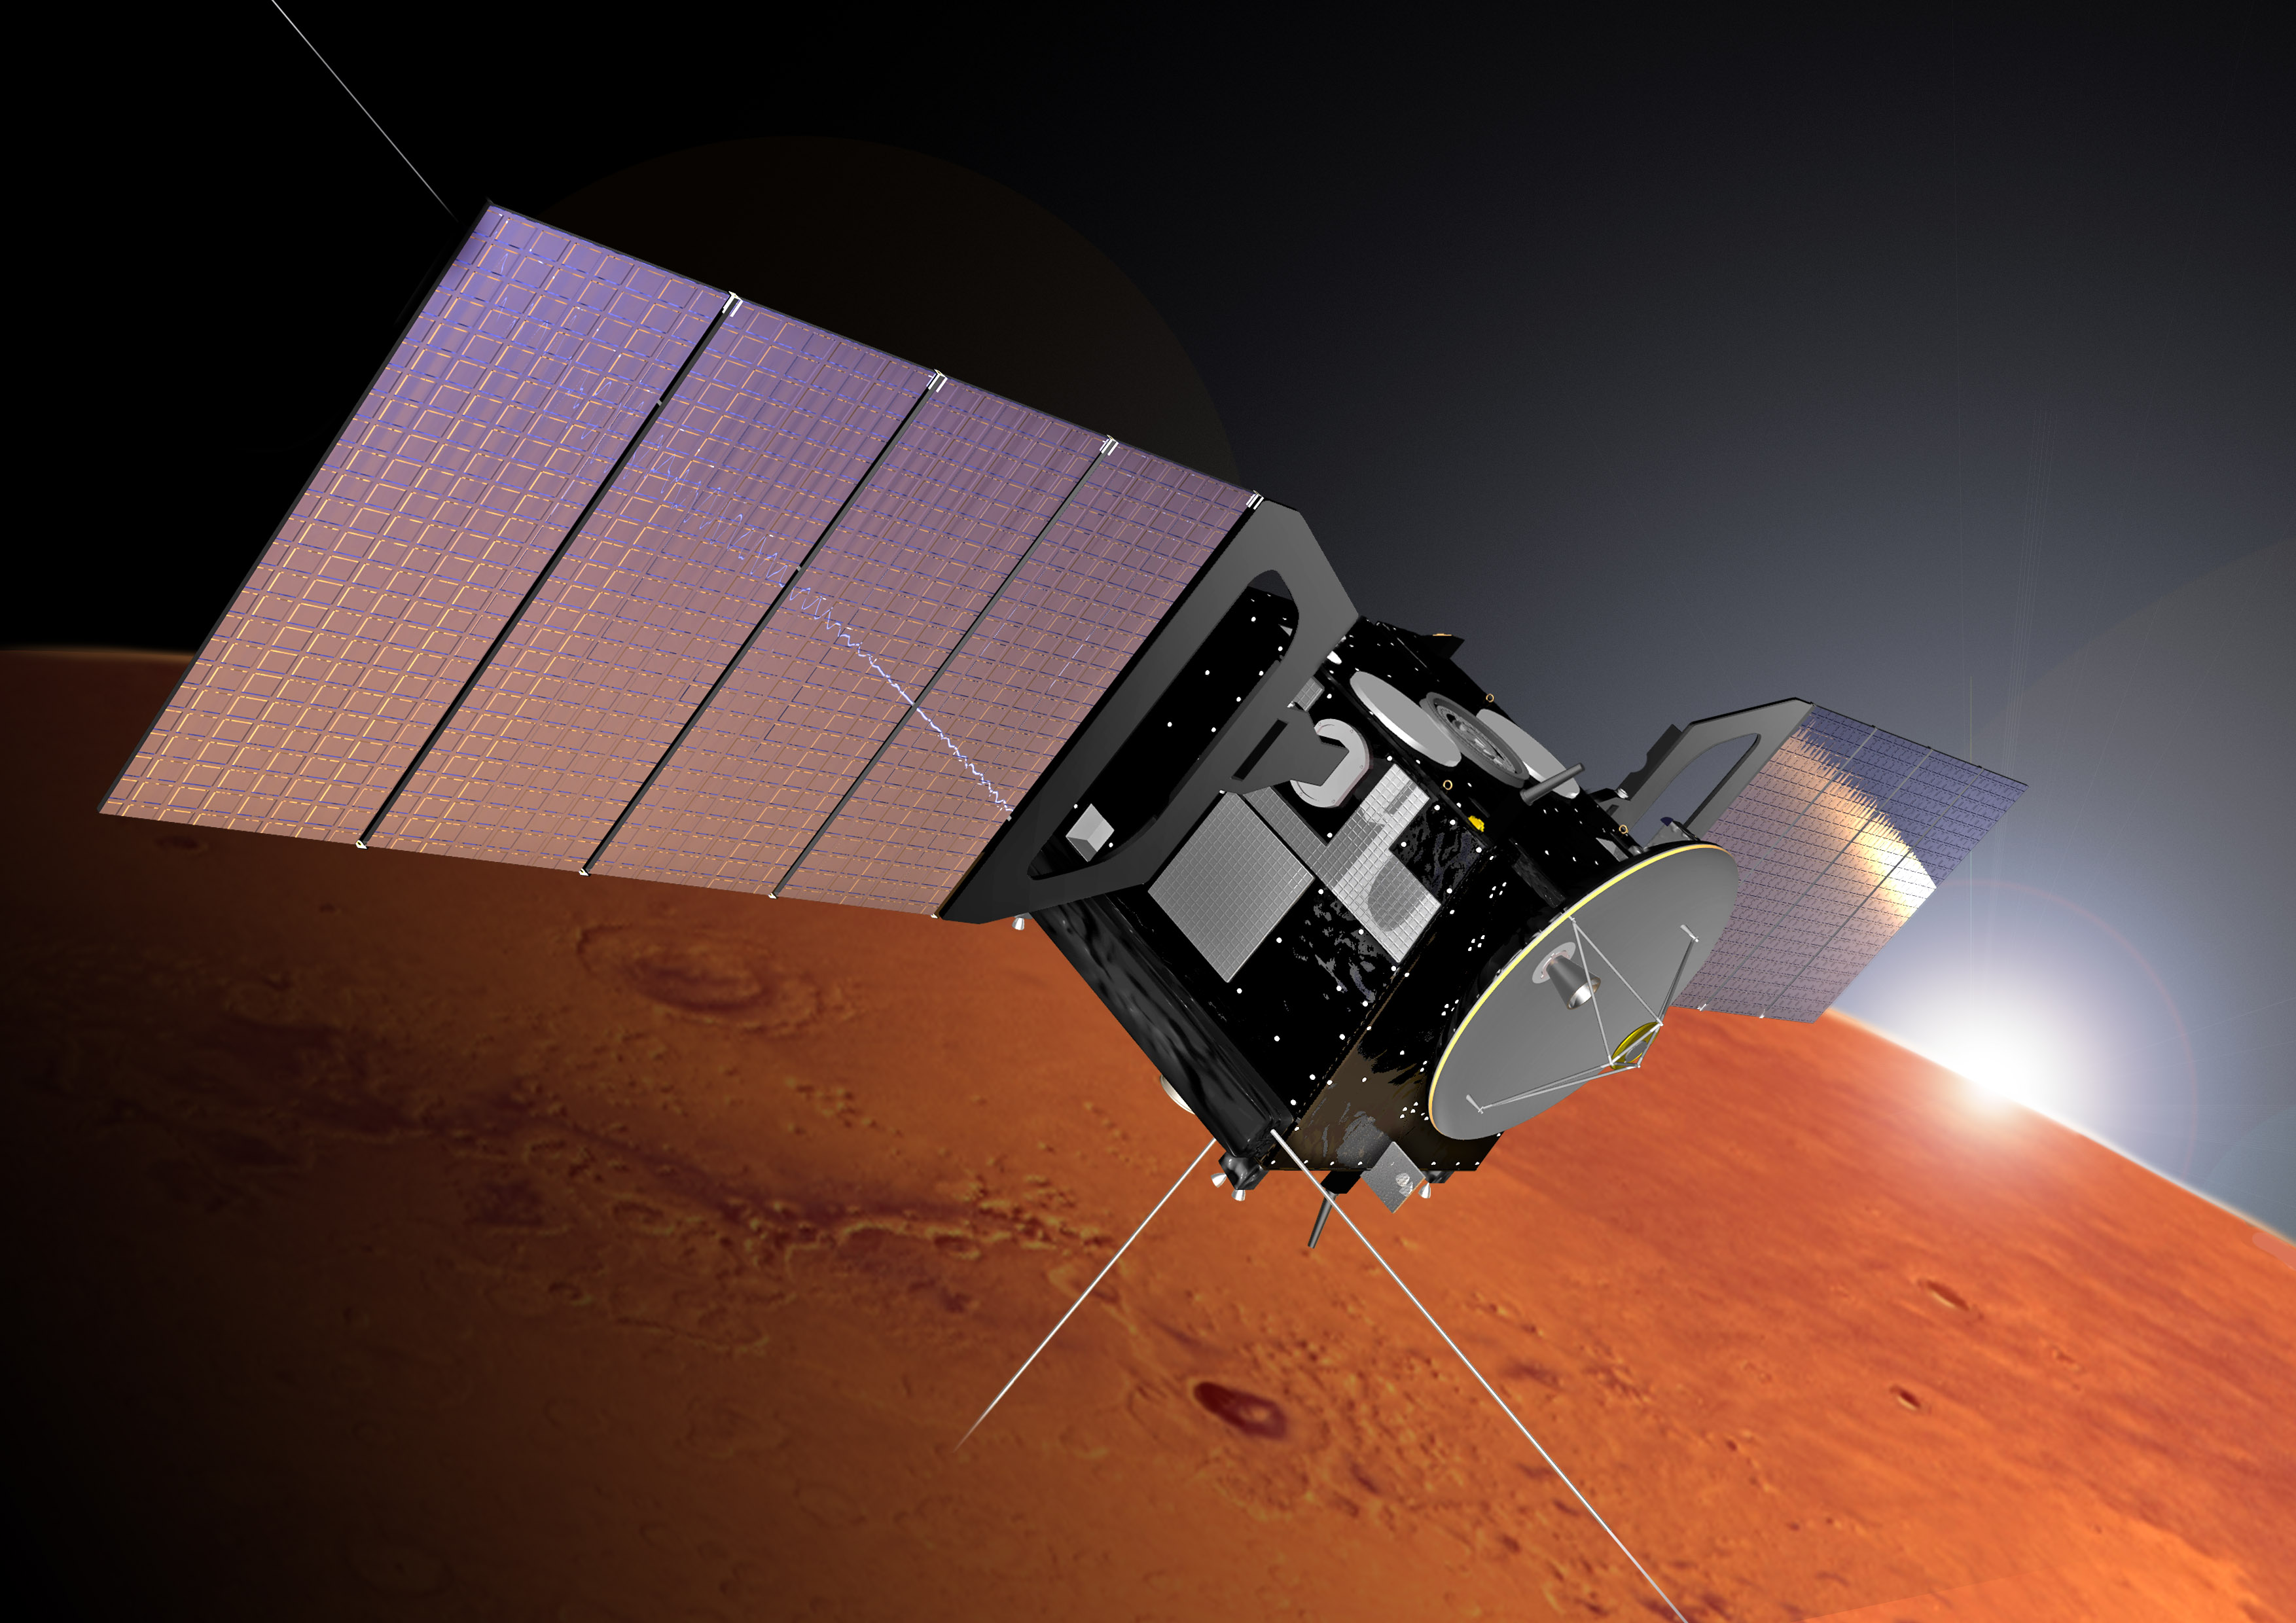 Mars Express launch, artwork. This European Space Agency